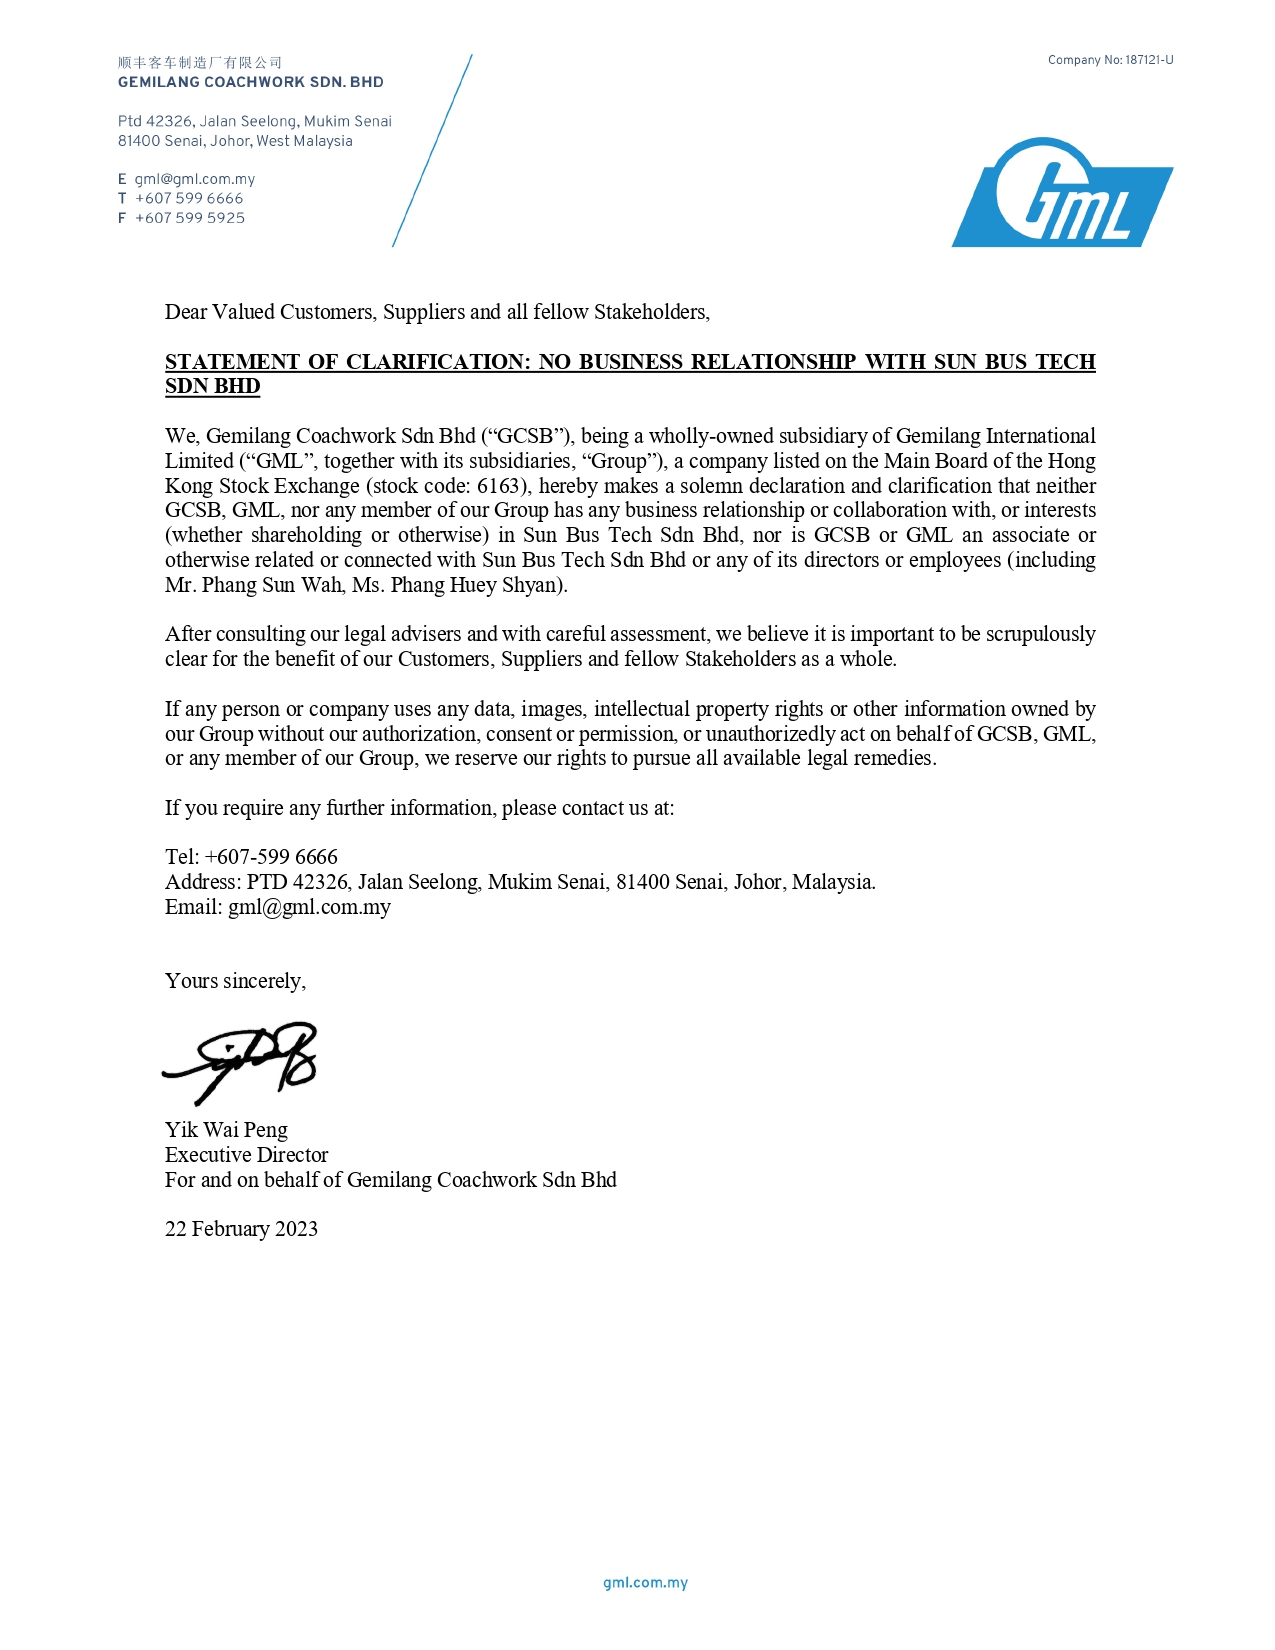 Statement of Clarification - No Business Relationship with Sun Bus Tech Sdn. Bhd.